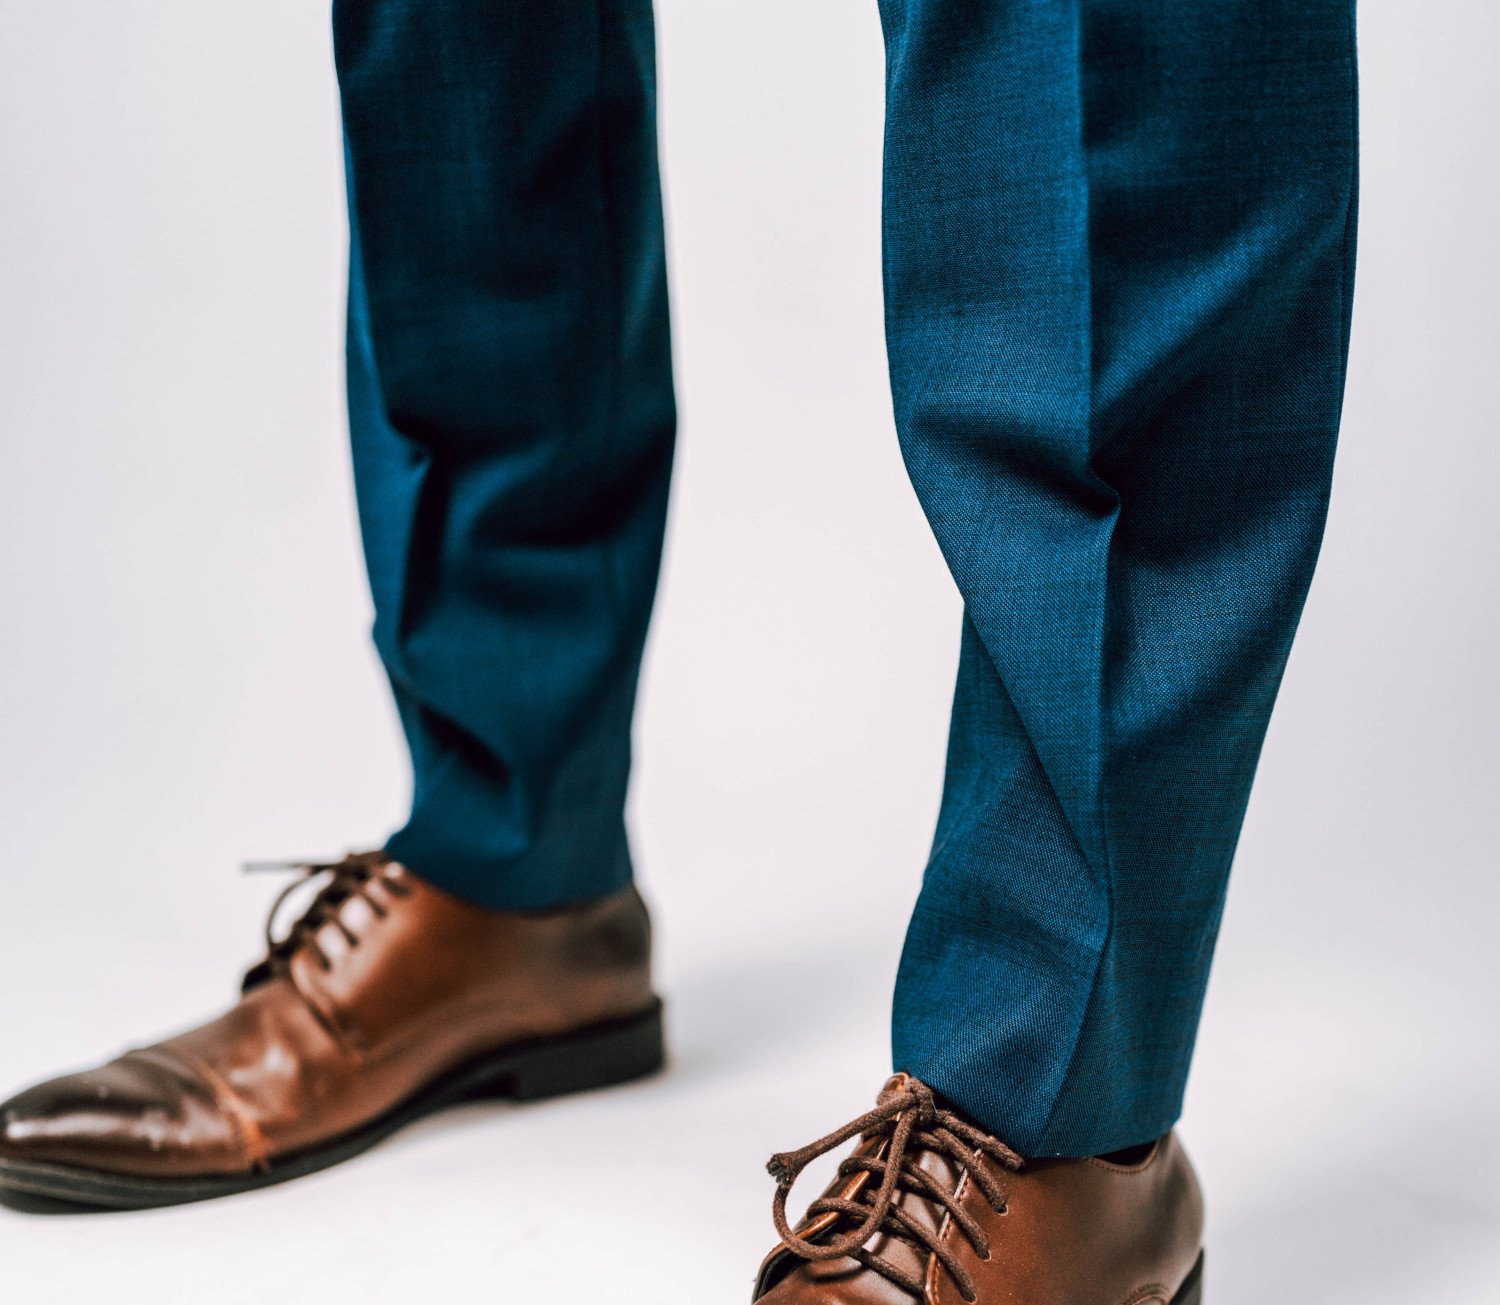 Chinos vs Jeans - Which Are Better To Wear?